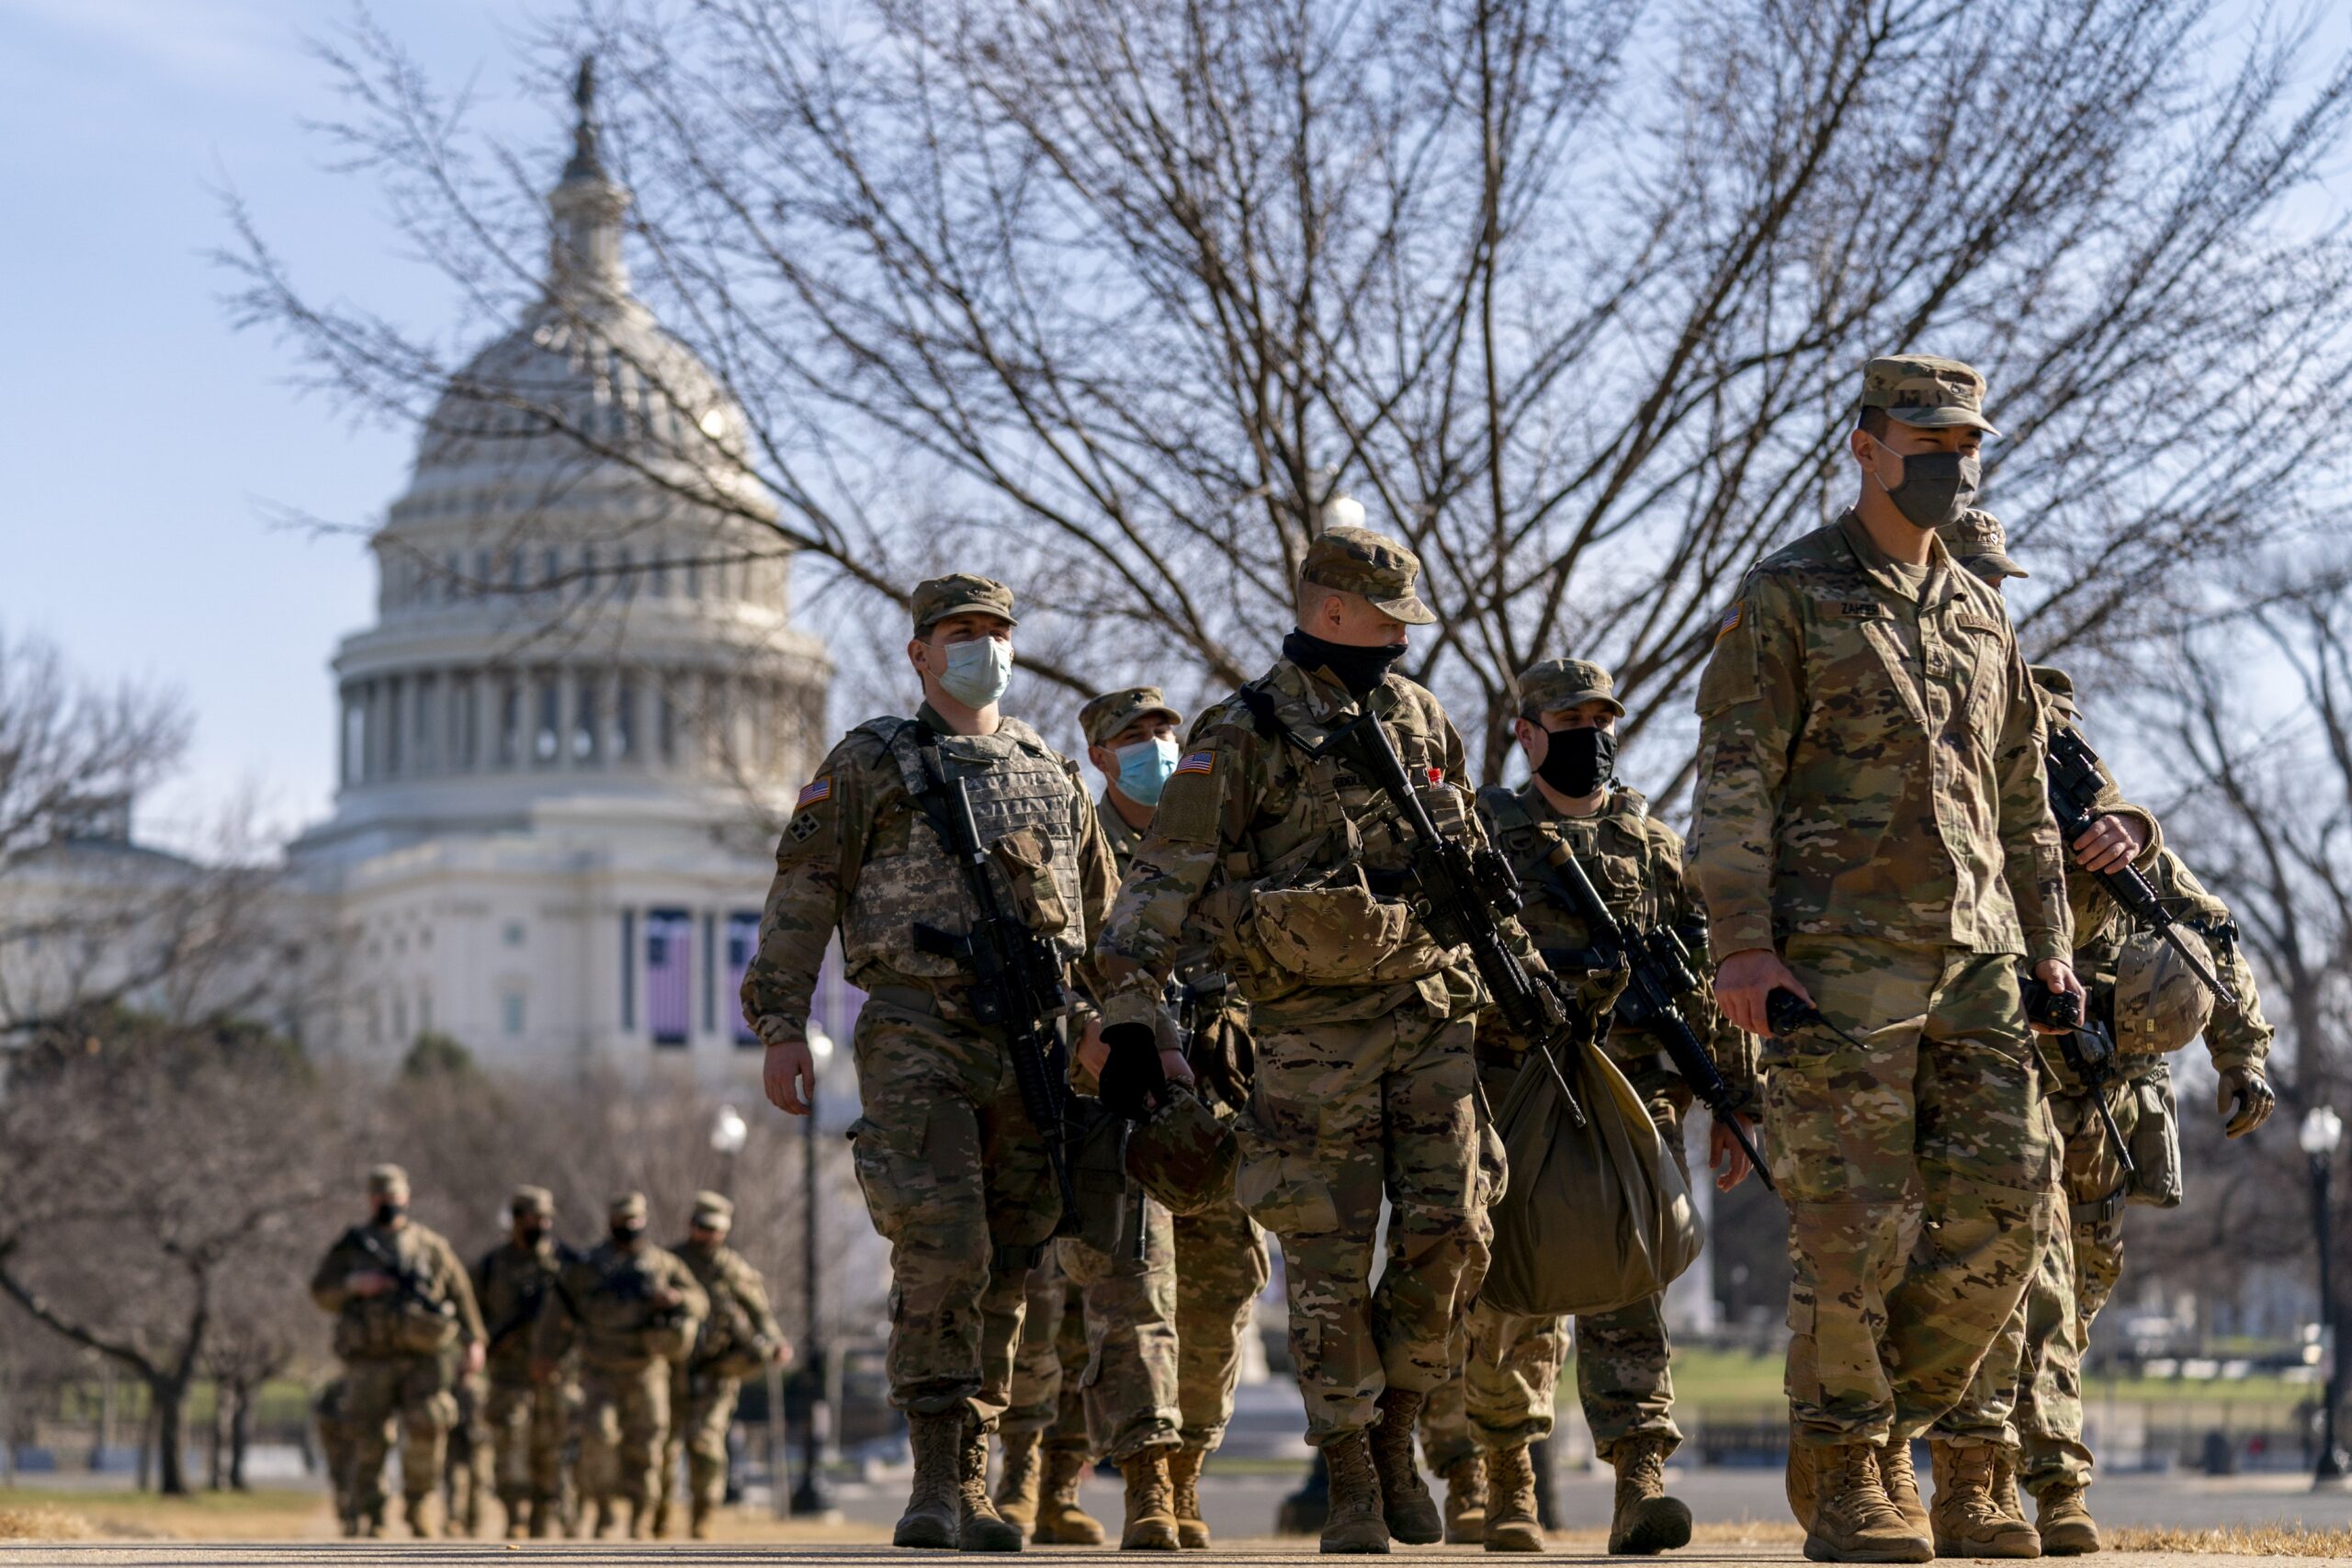 National Guard members providing security at the U.S. Capitol